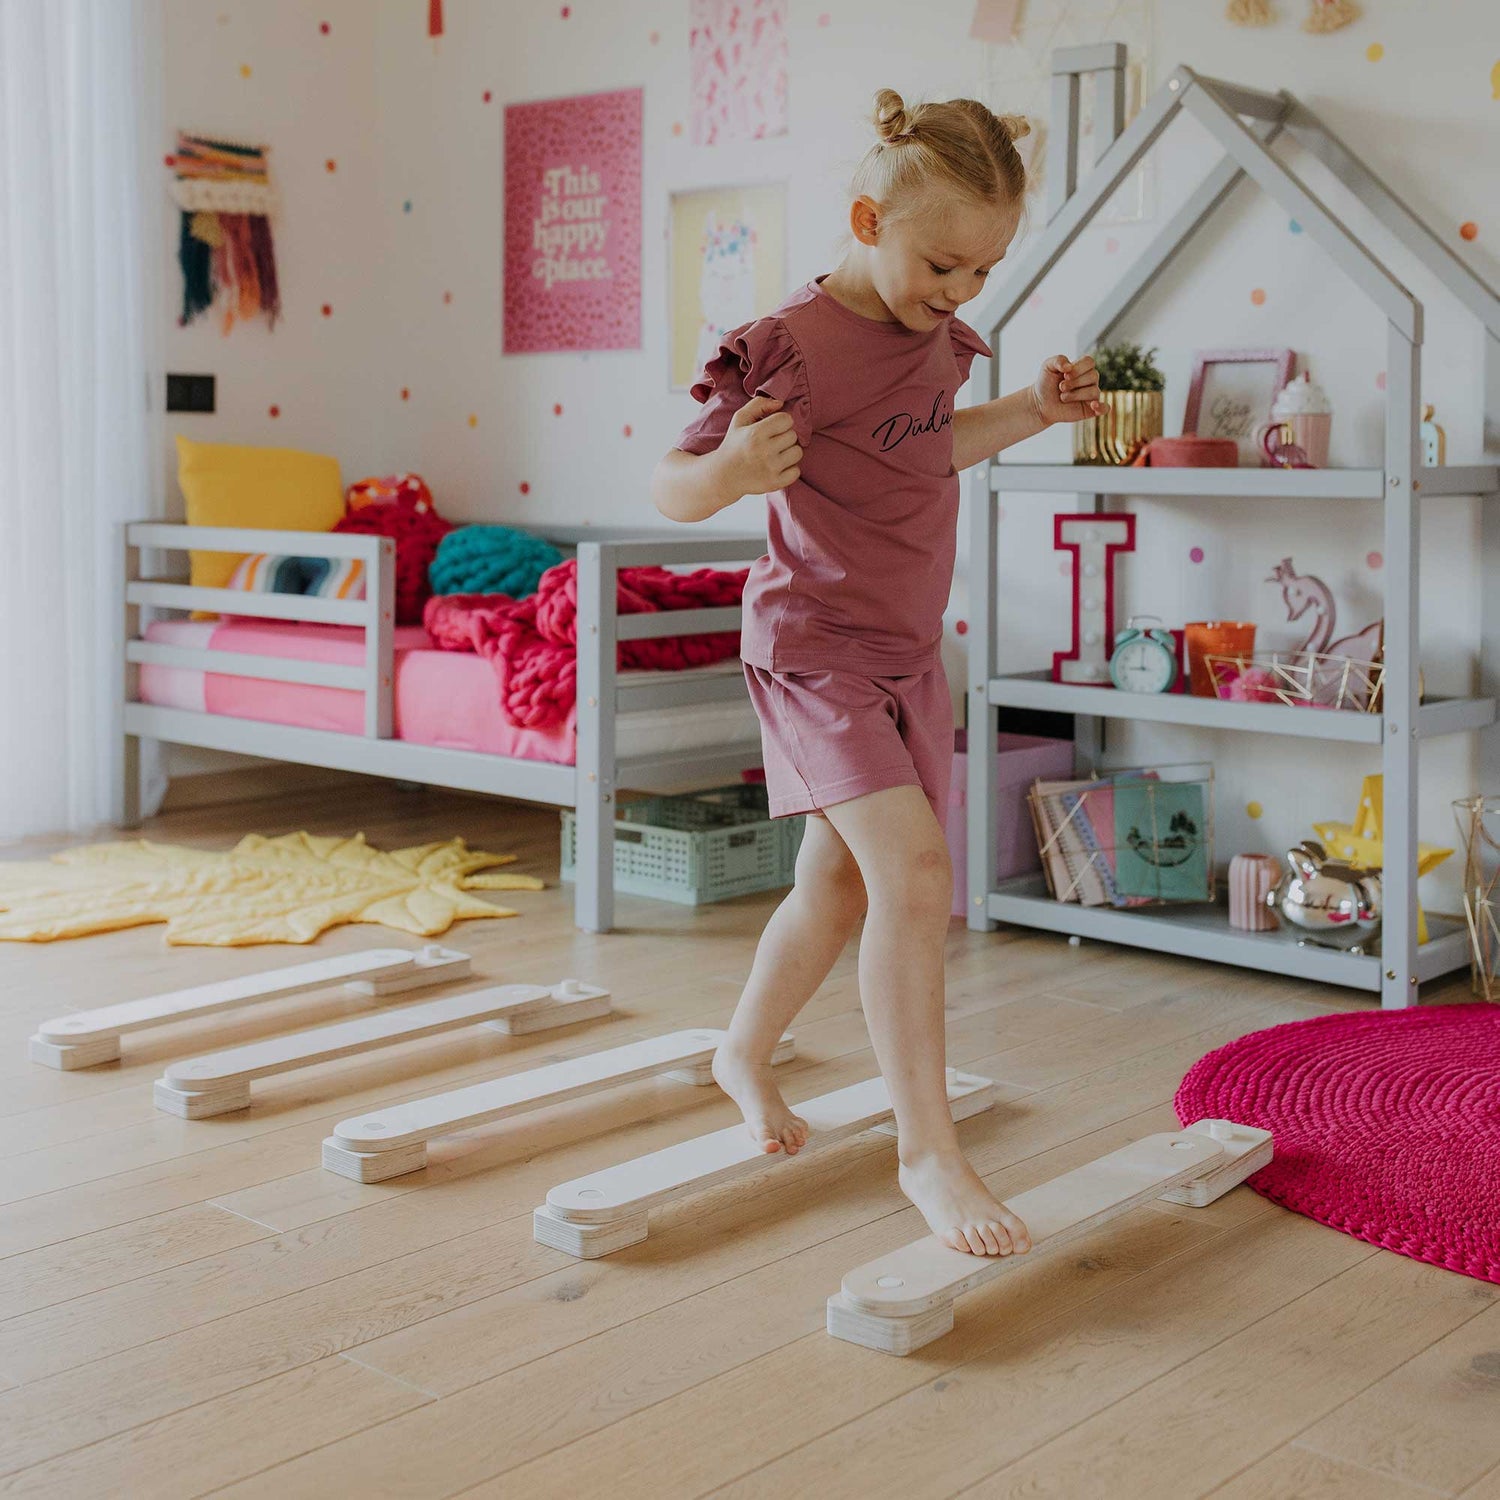 A little girl is playing with wooden blocks in her room.